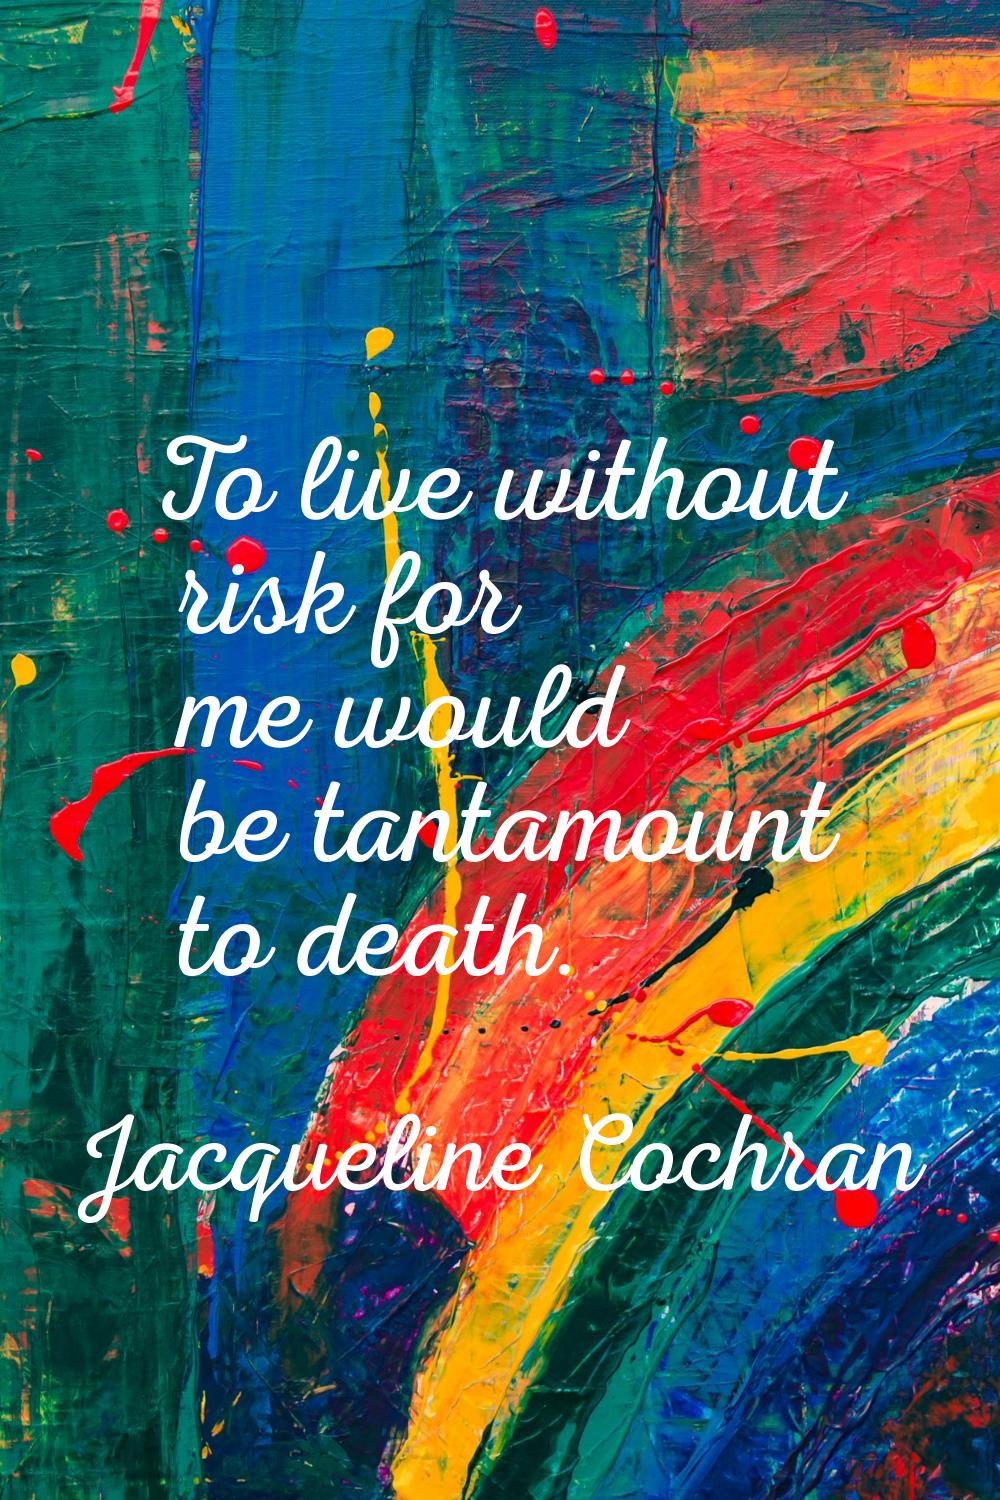 To live without risk for me would be tantamount to death.